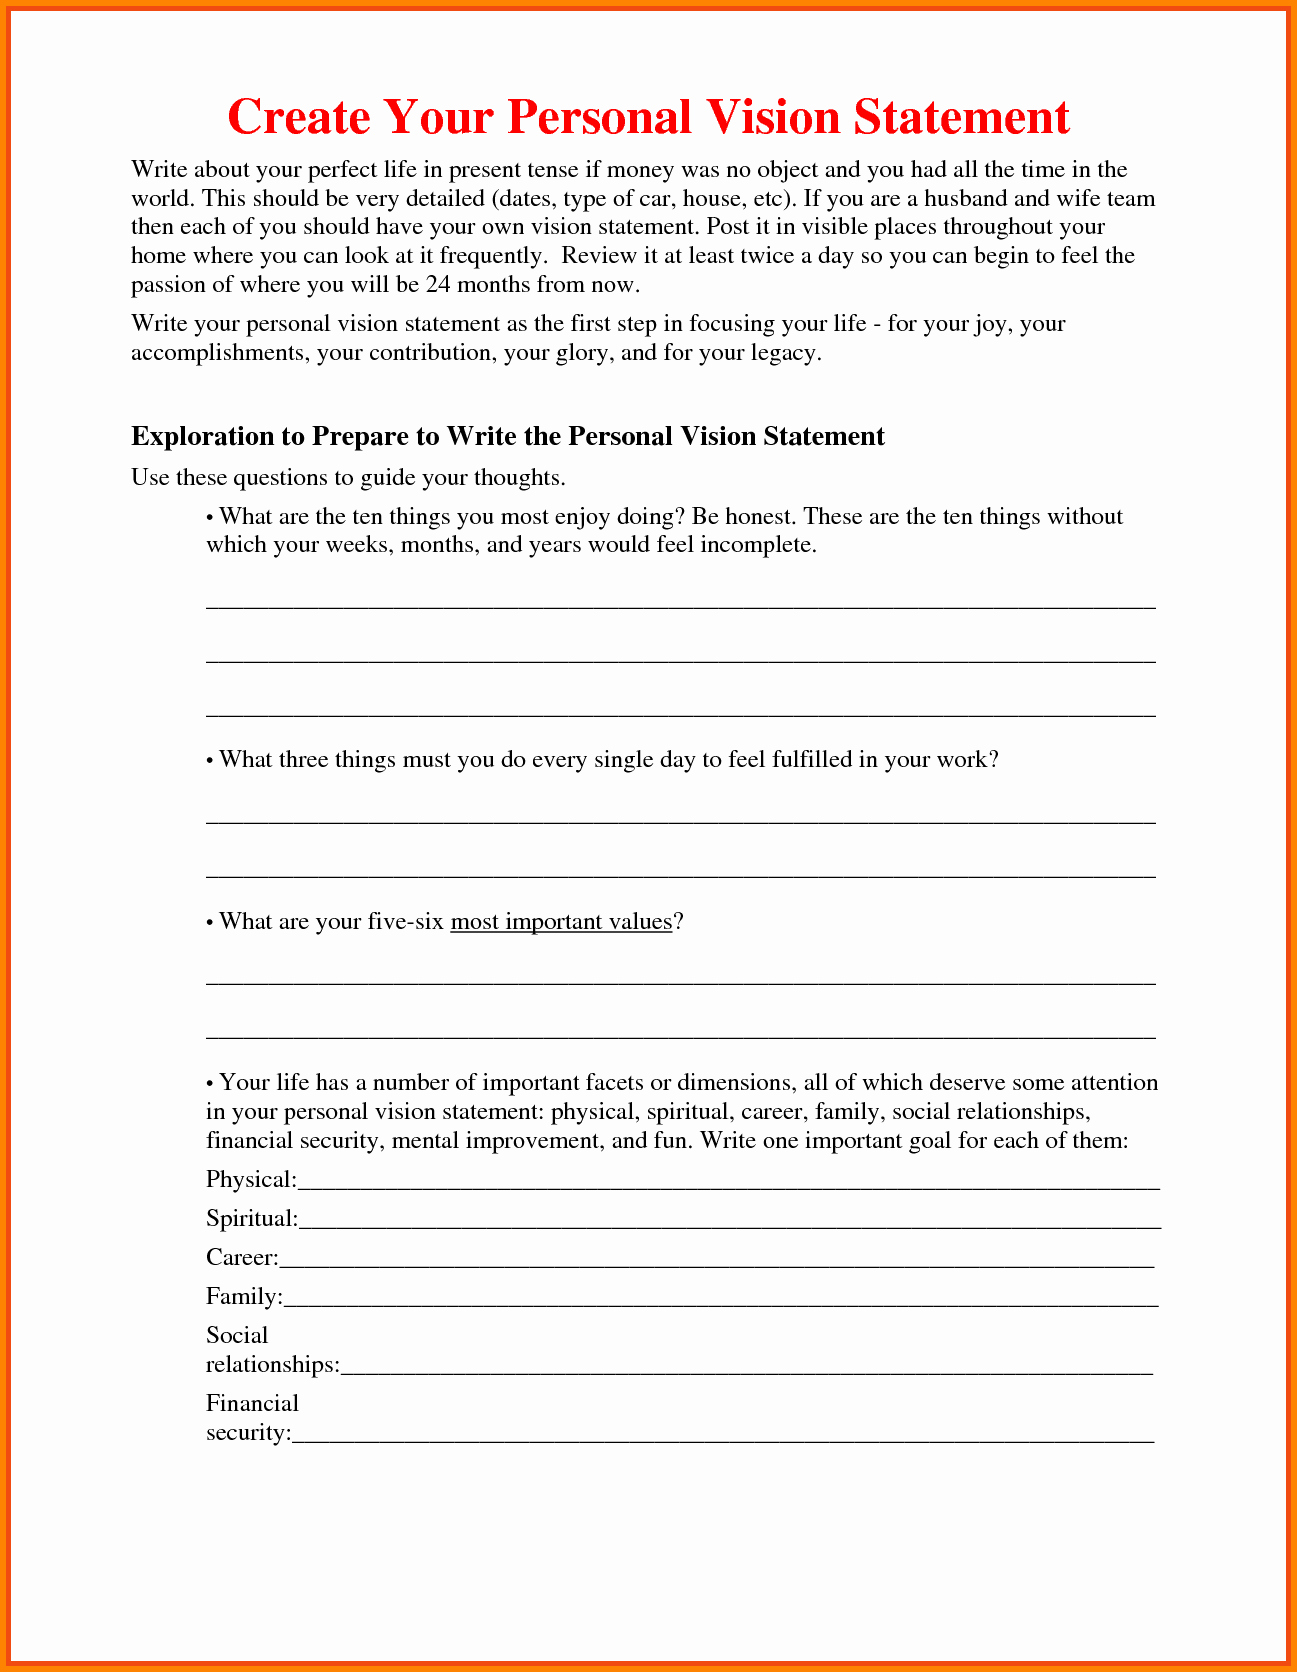 Personal Vision Statement Template Best Of 10 Personal Vision Statement Template